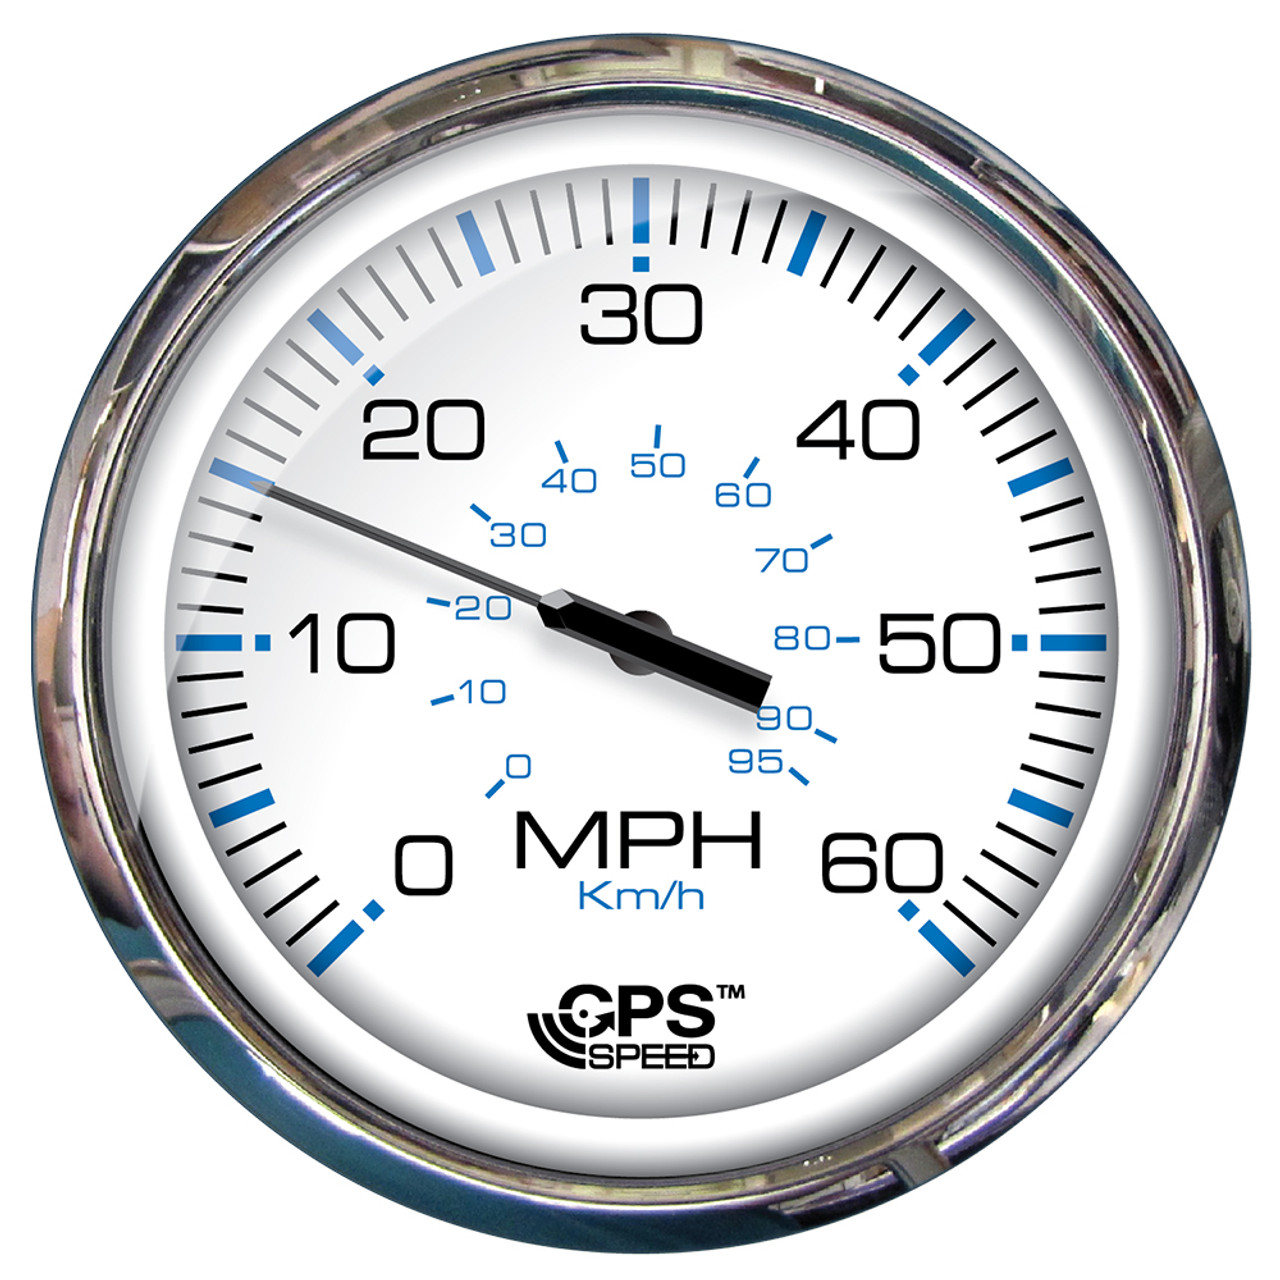 Faria 5" Speedometer (60 MPH) GPS (Studded) Chesapeake White w/Stainless Steel